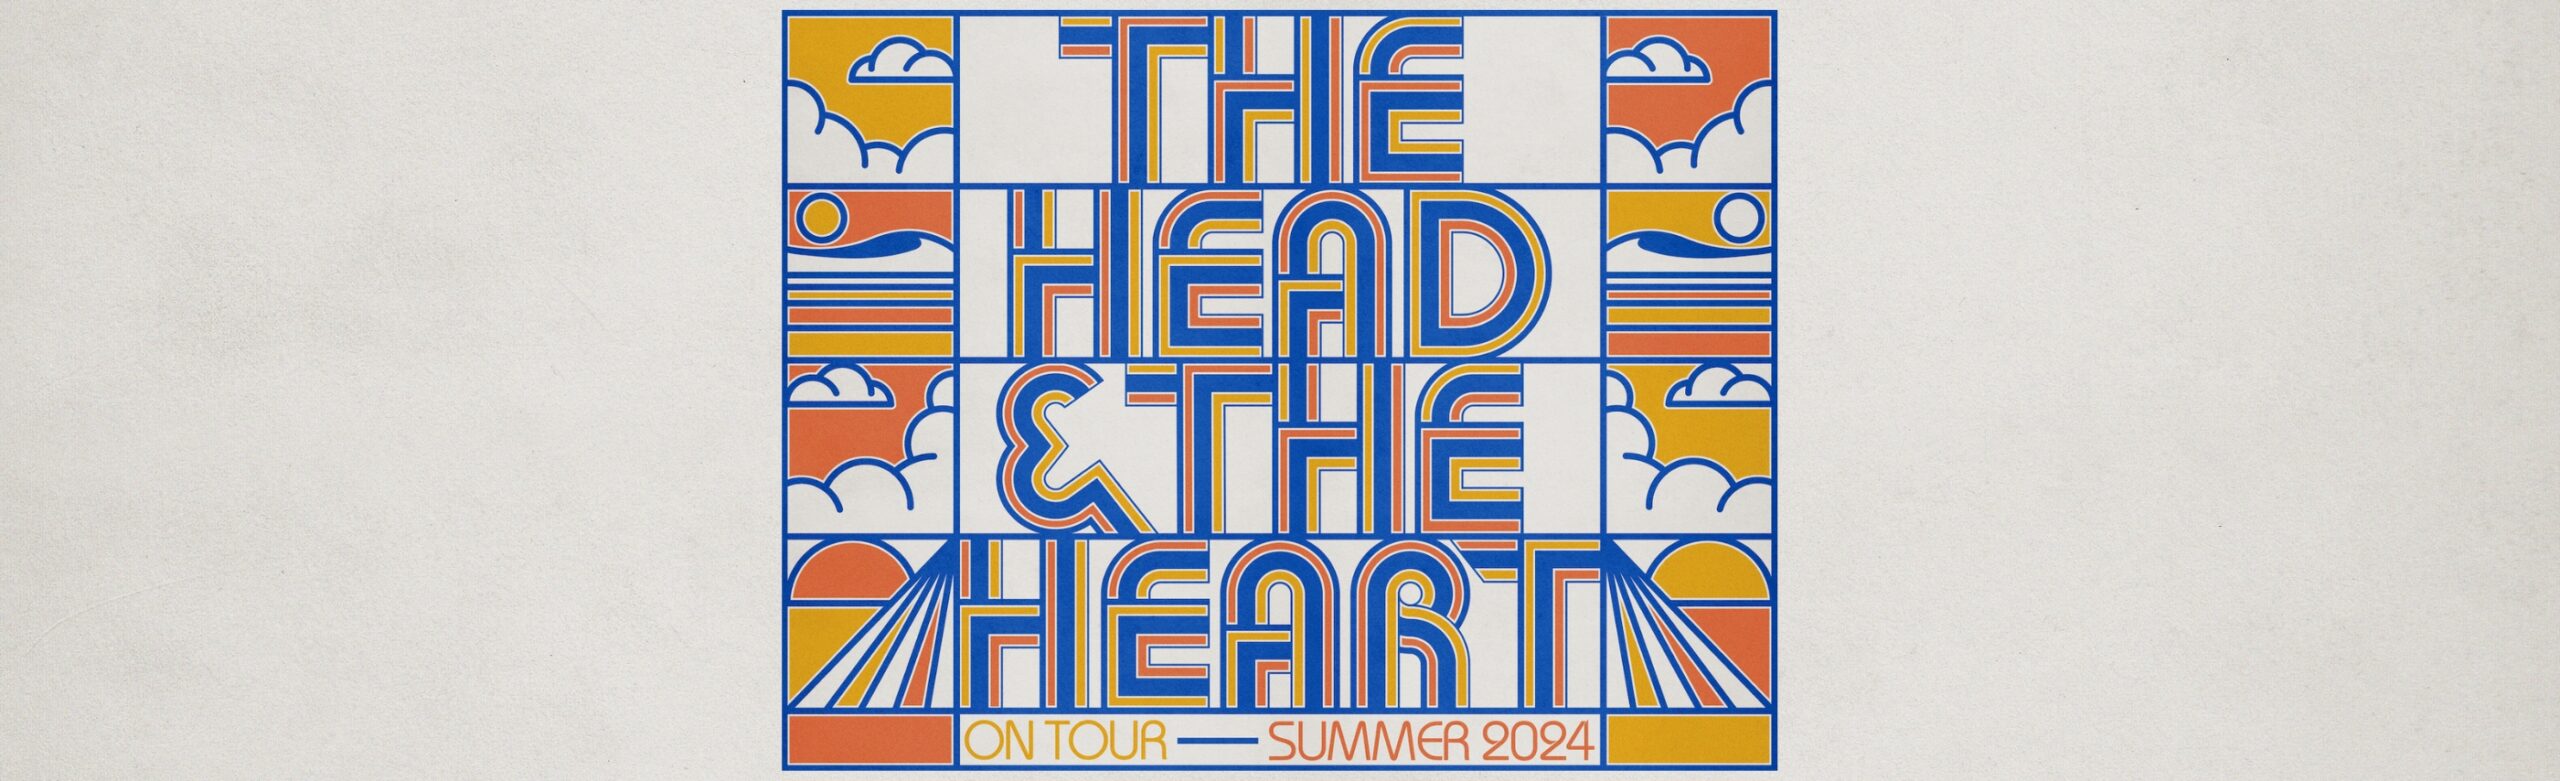 The Head and The Heart Announce Concert at The ELM with Michigander Image